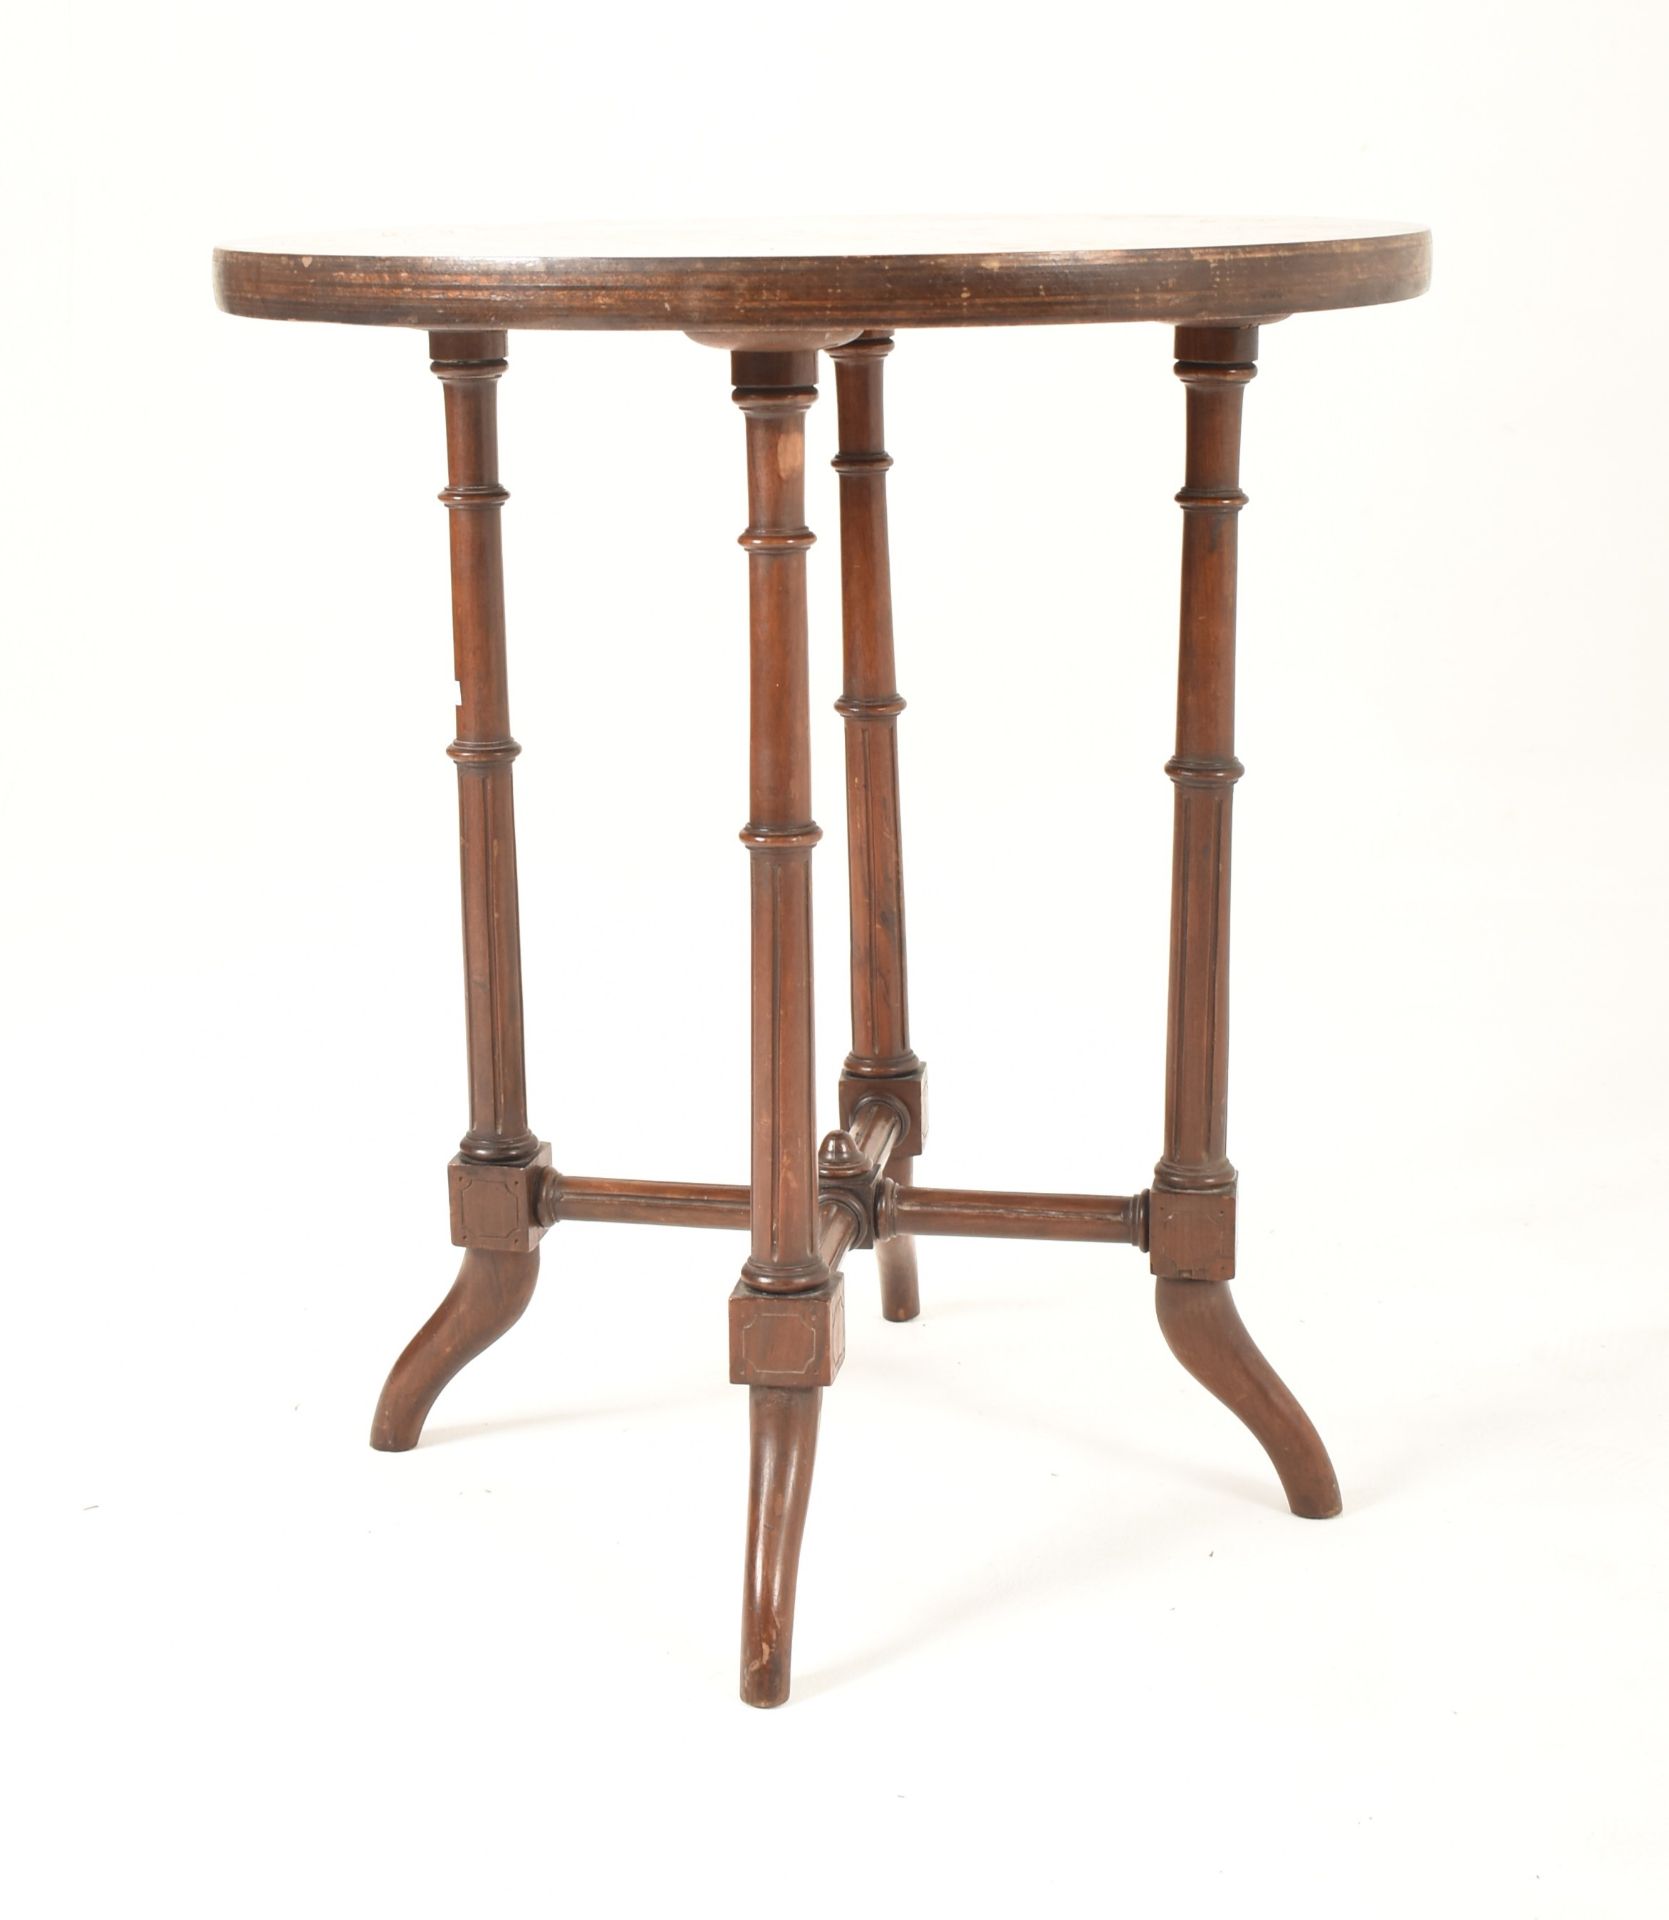 LATE 19TH CENTURY MAHOGANY & SATINWOOD MARQUETRY SIDE TABLE - Image 5 of 5